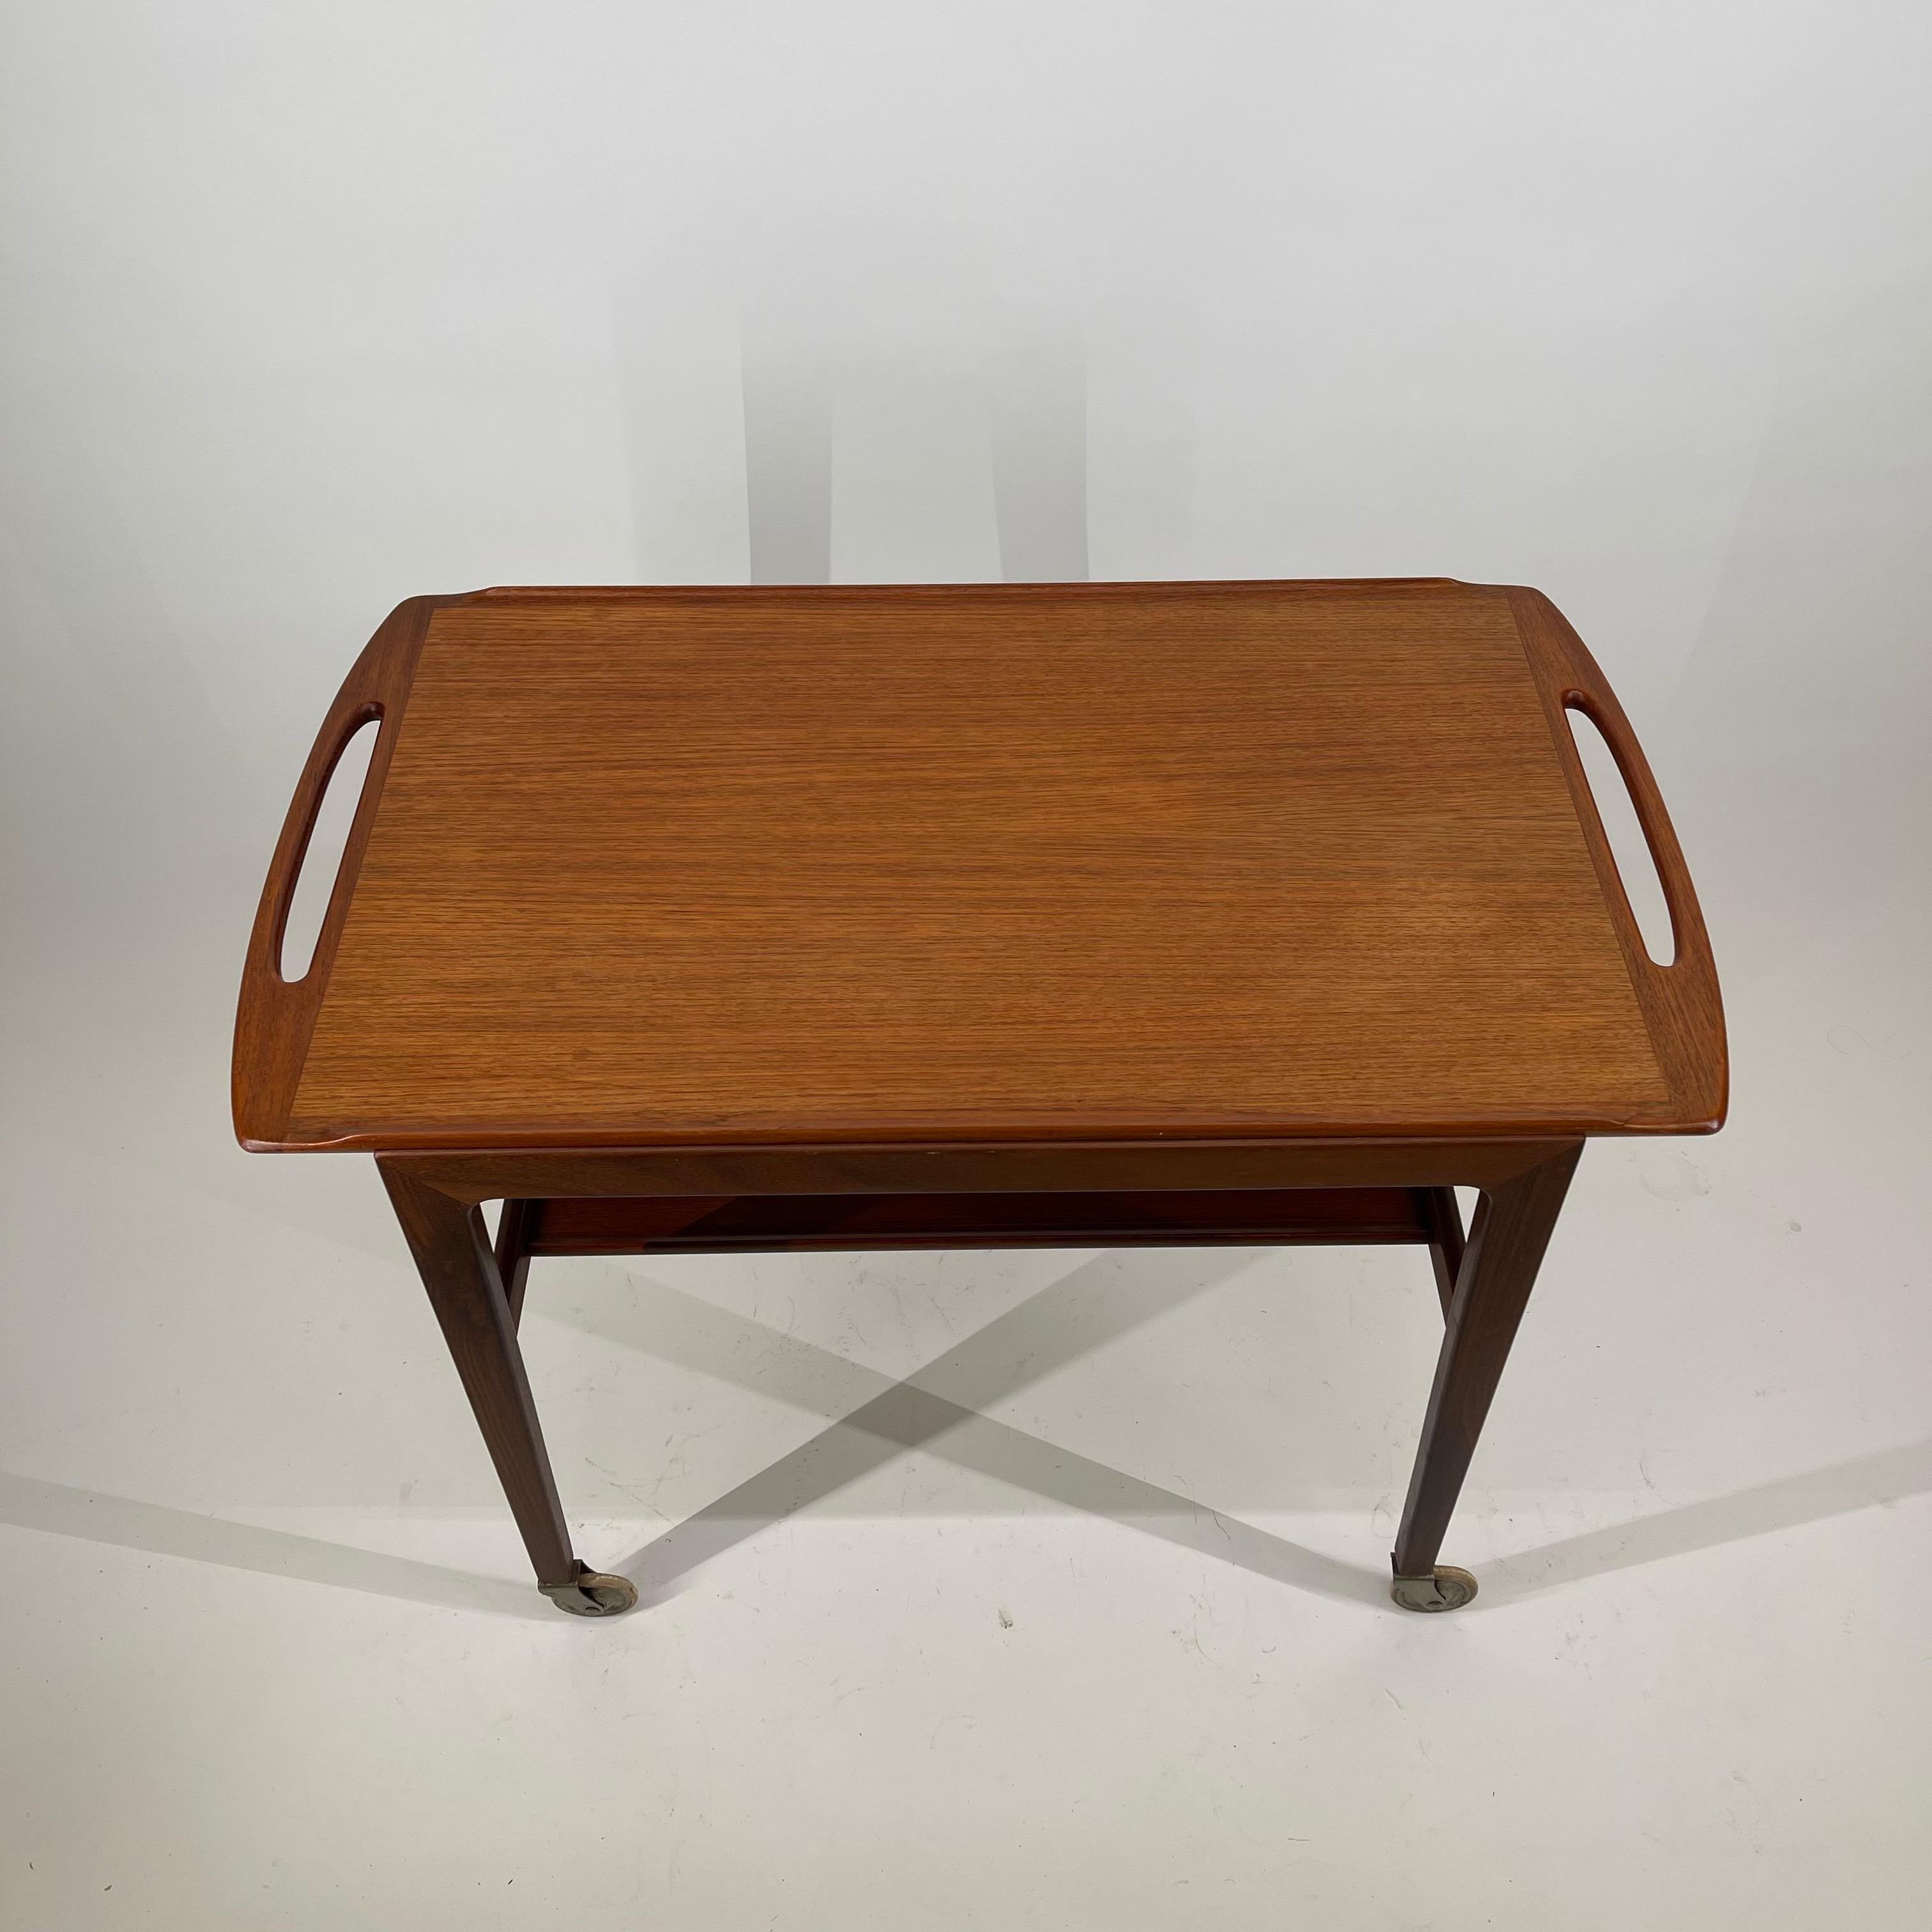 Danish 1960s serving bar cart with removable tray by cabinetmaker Anton Kildebergs Møbelfabrik. Marked underneath.